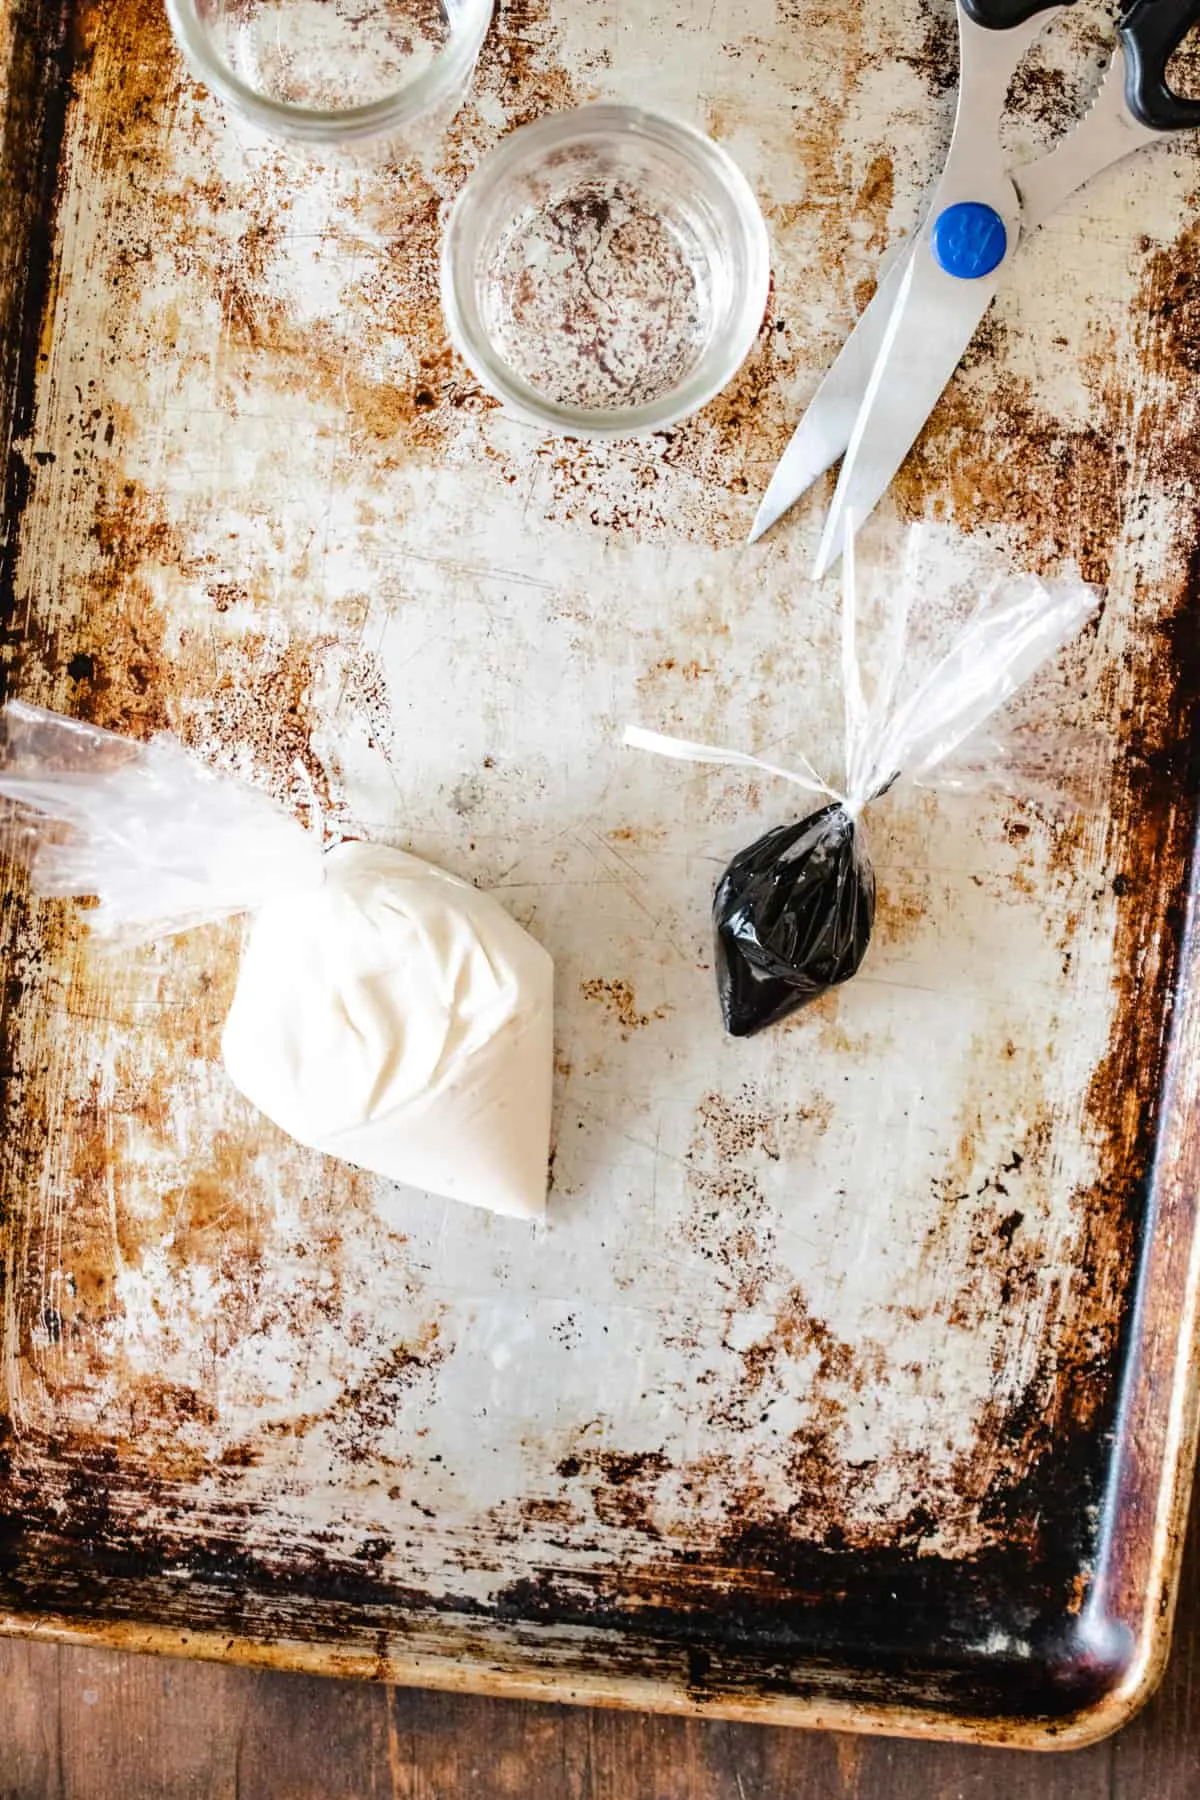 White icing in a plastic bag, next to small bag of black icing by a pair of scissors. 